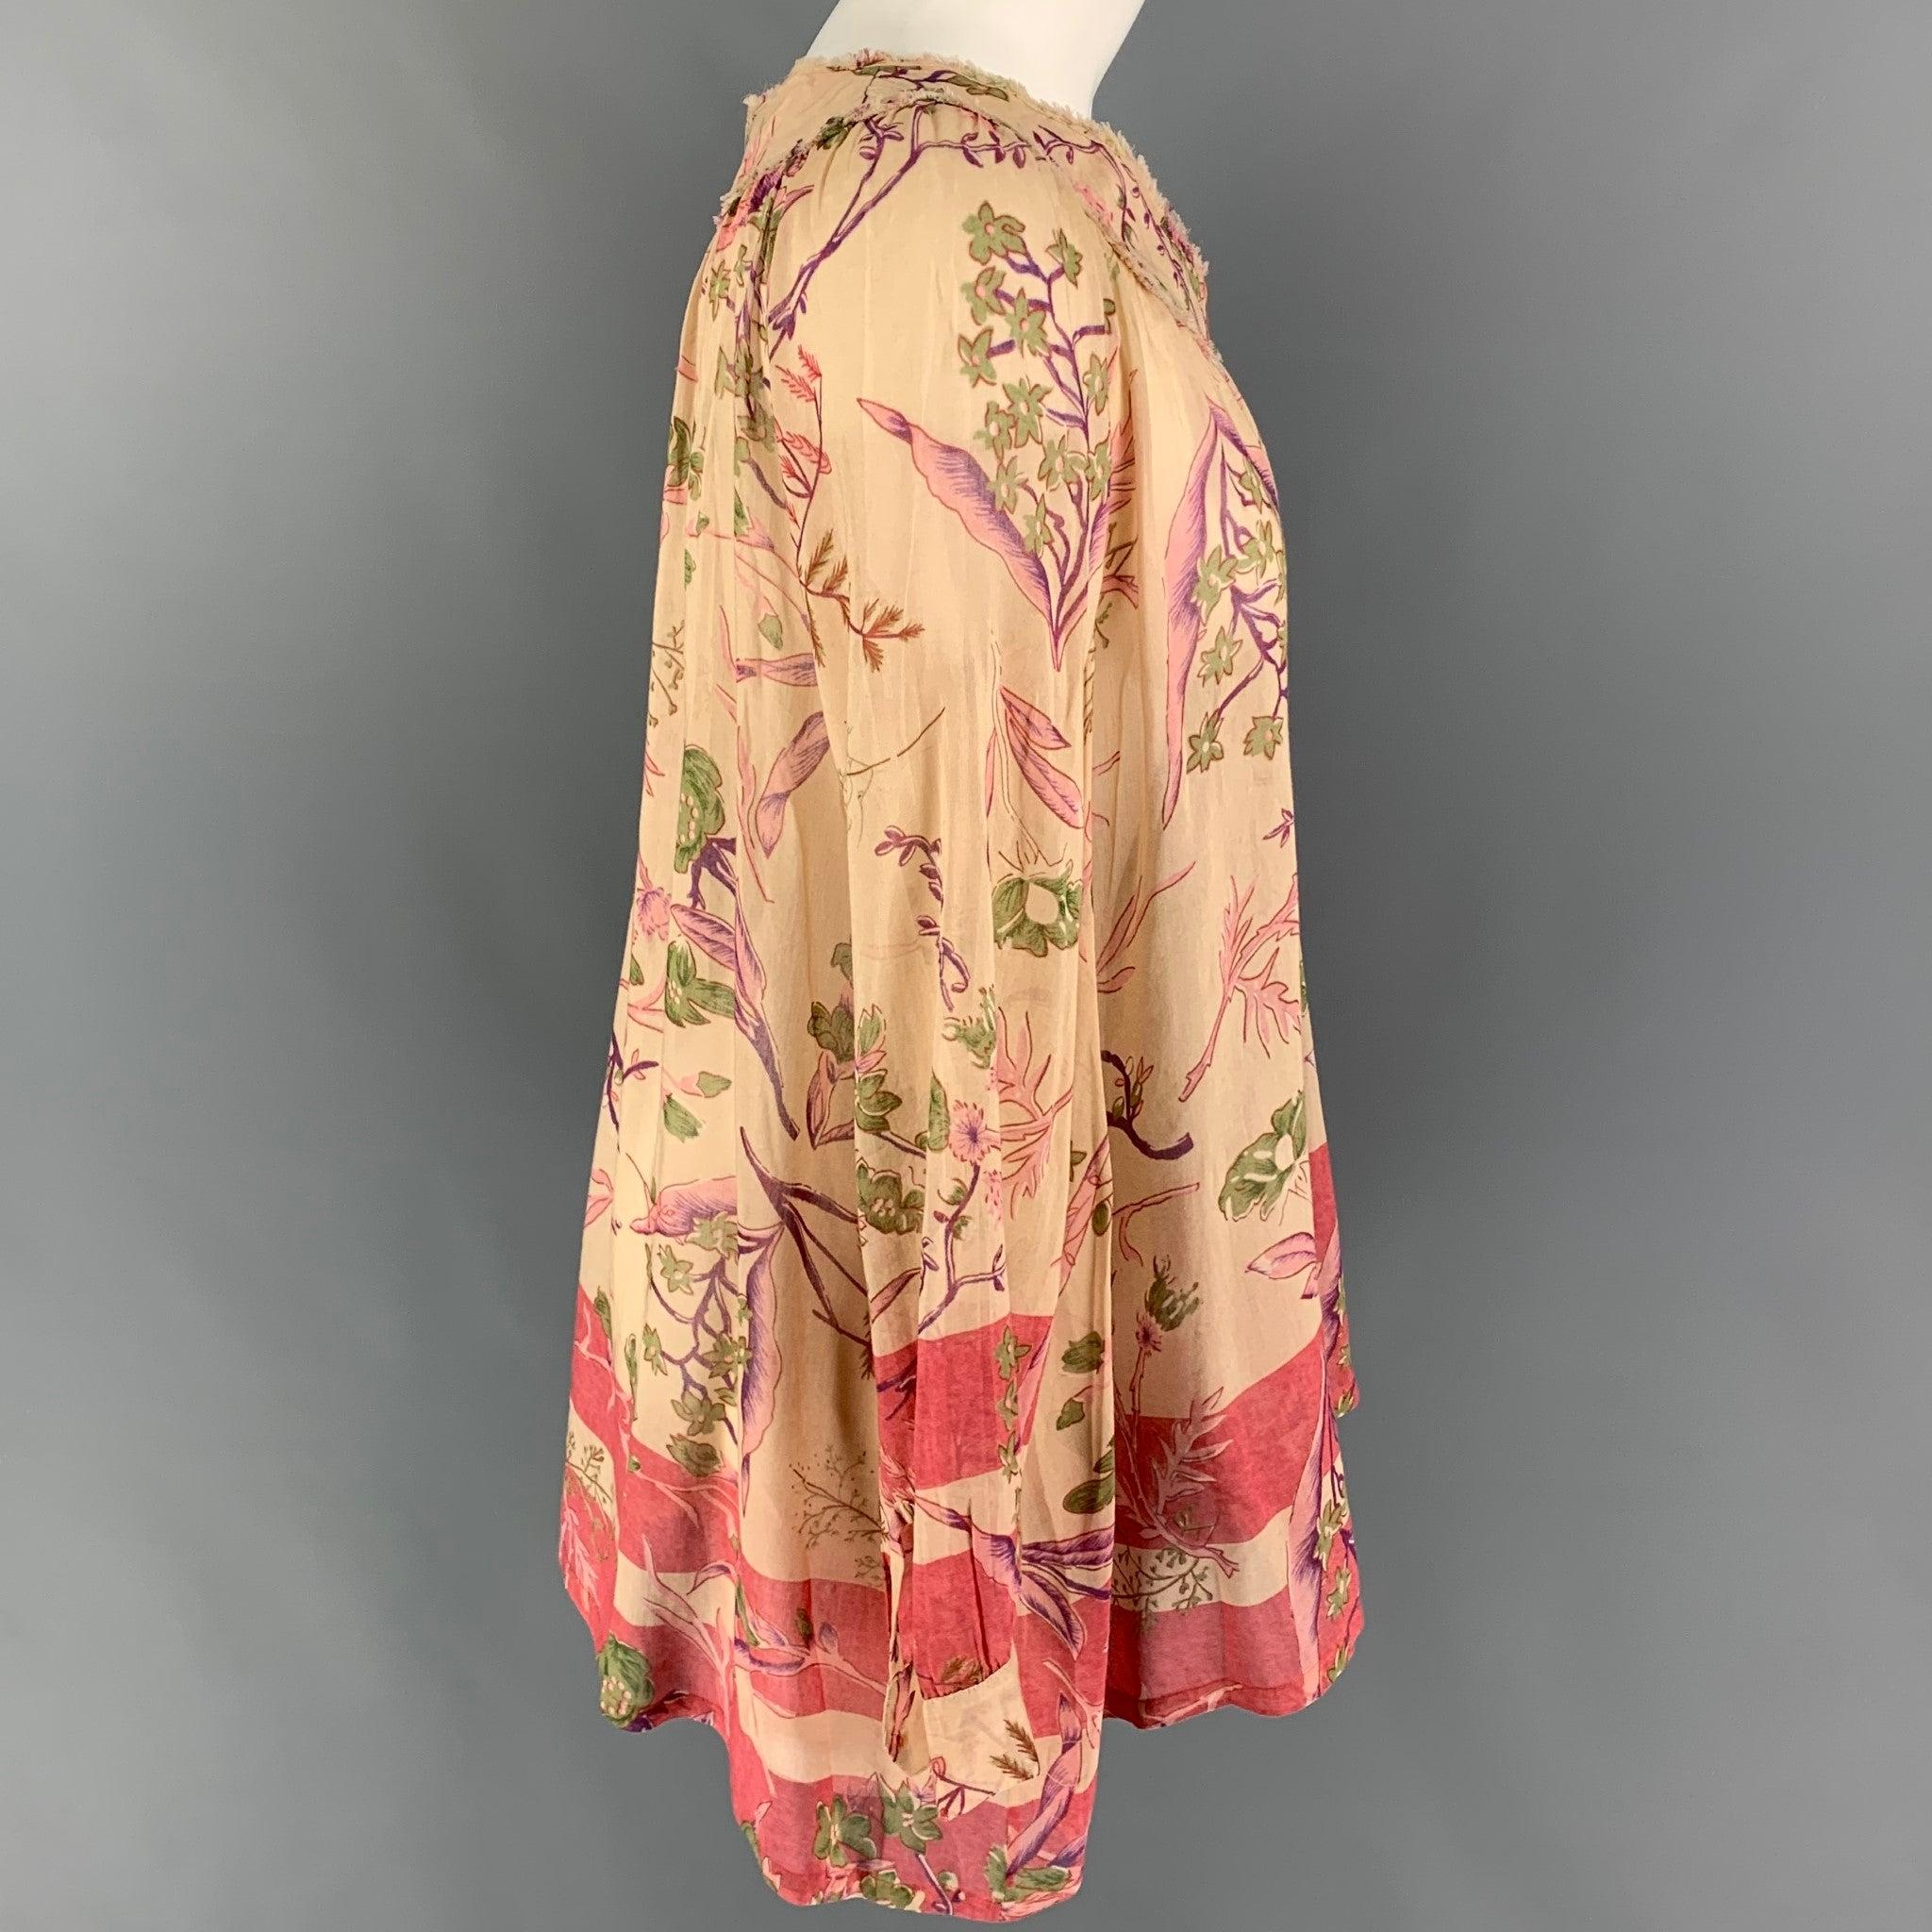 DONNA KARAN blouse comes in a beige & print floral silk featuring a tunic style, raw edge, and a buttoned closure.
Very Good
Pre-Owned Condition. 

Marked:   6 

Measurements: 
 
Shoulder: 16 inches  Bust: 42 inches  Sleeve: 24 inches  Length: 27